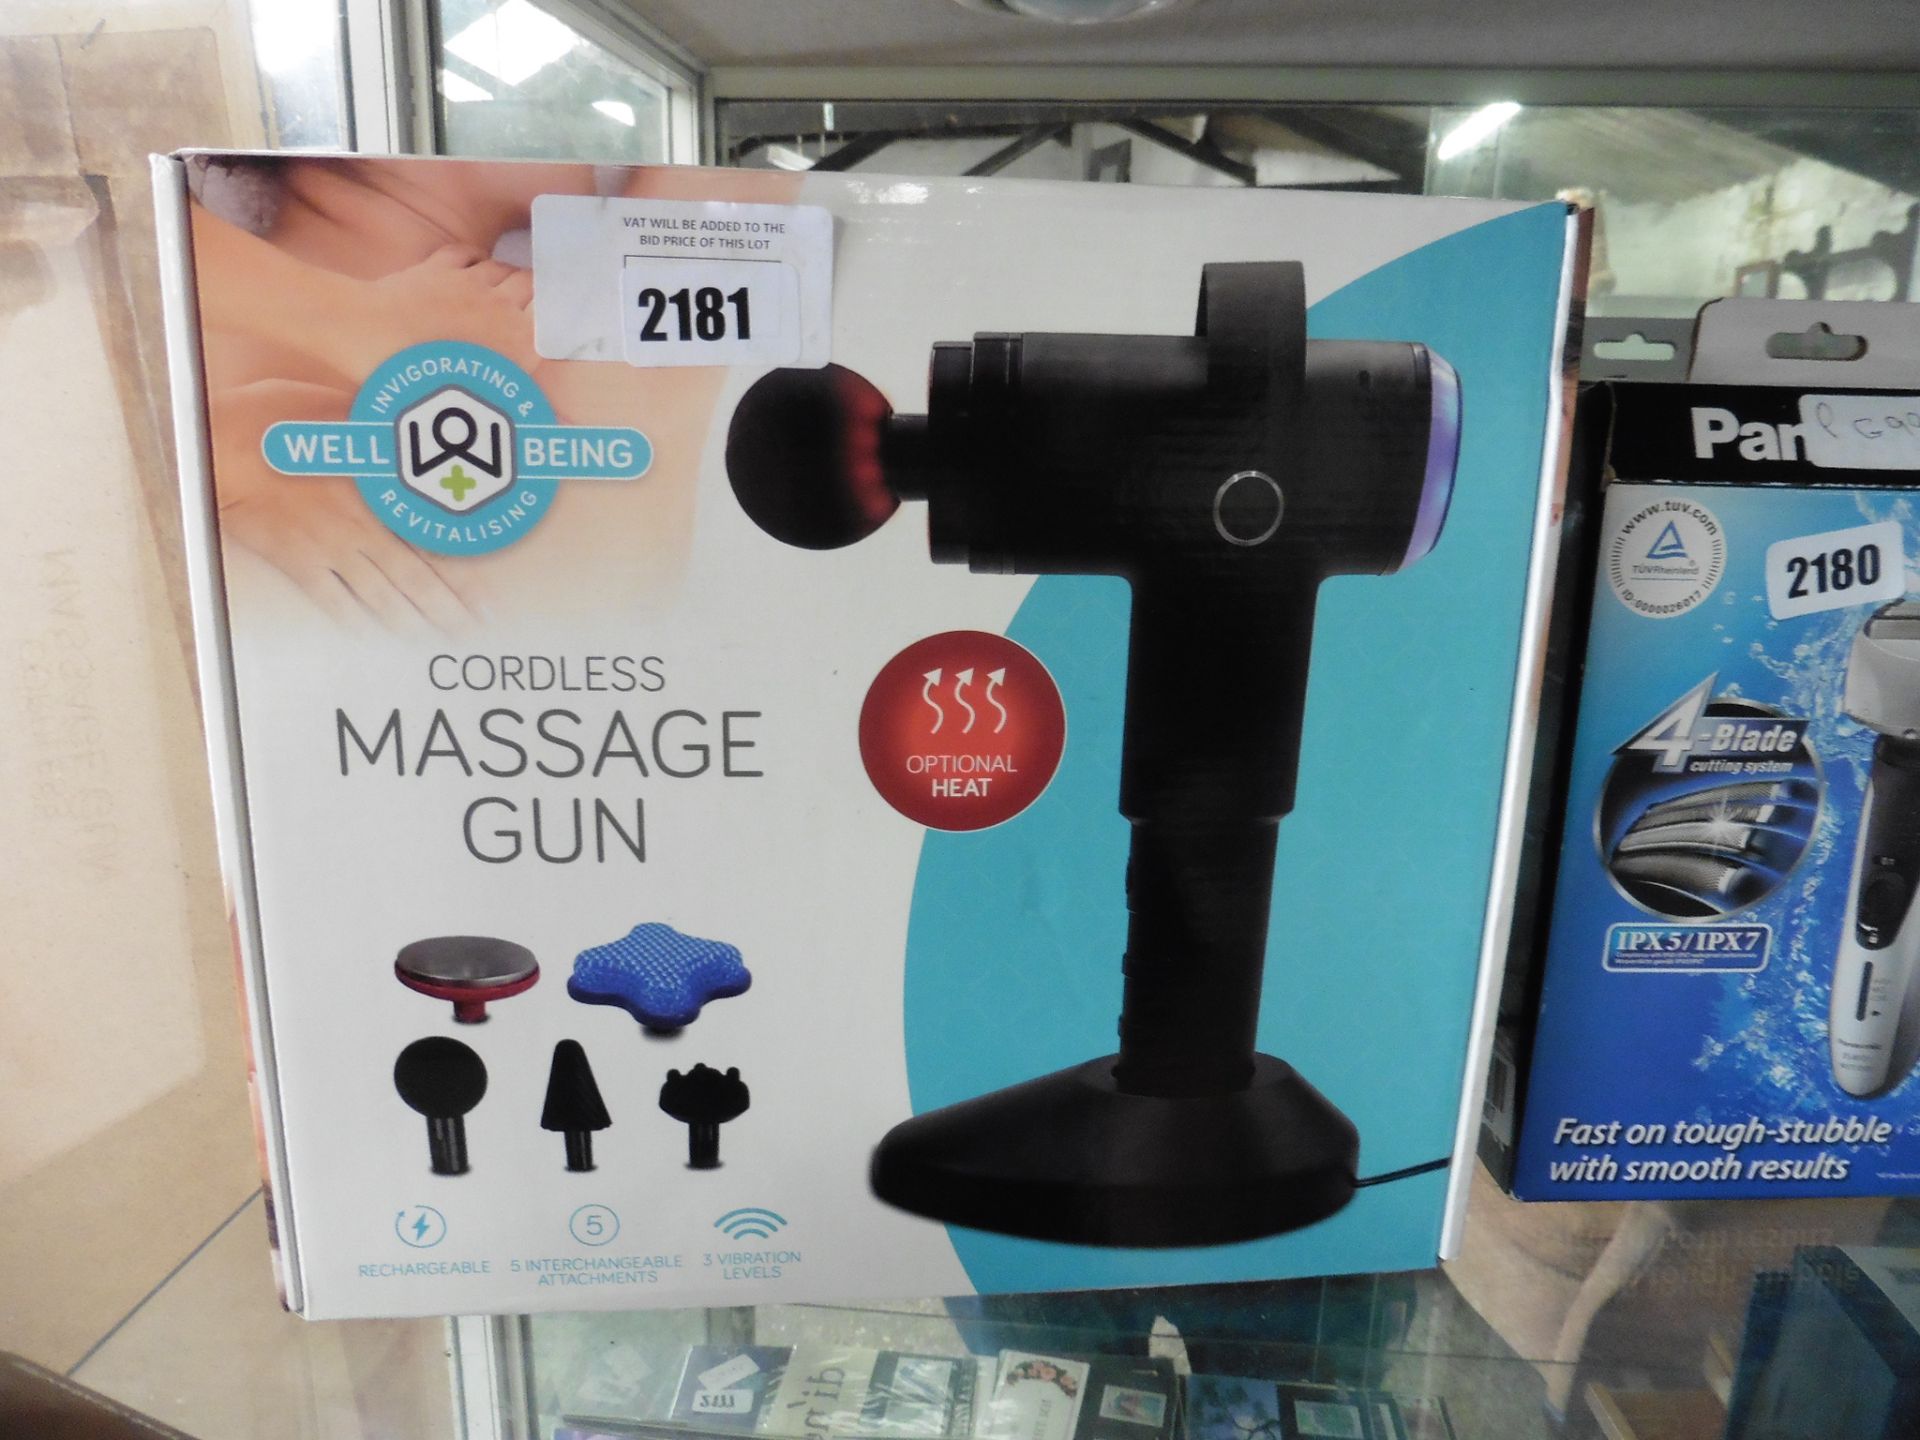 Well Being revitalizing massage gun with box